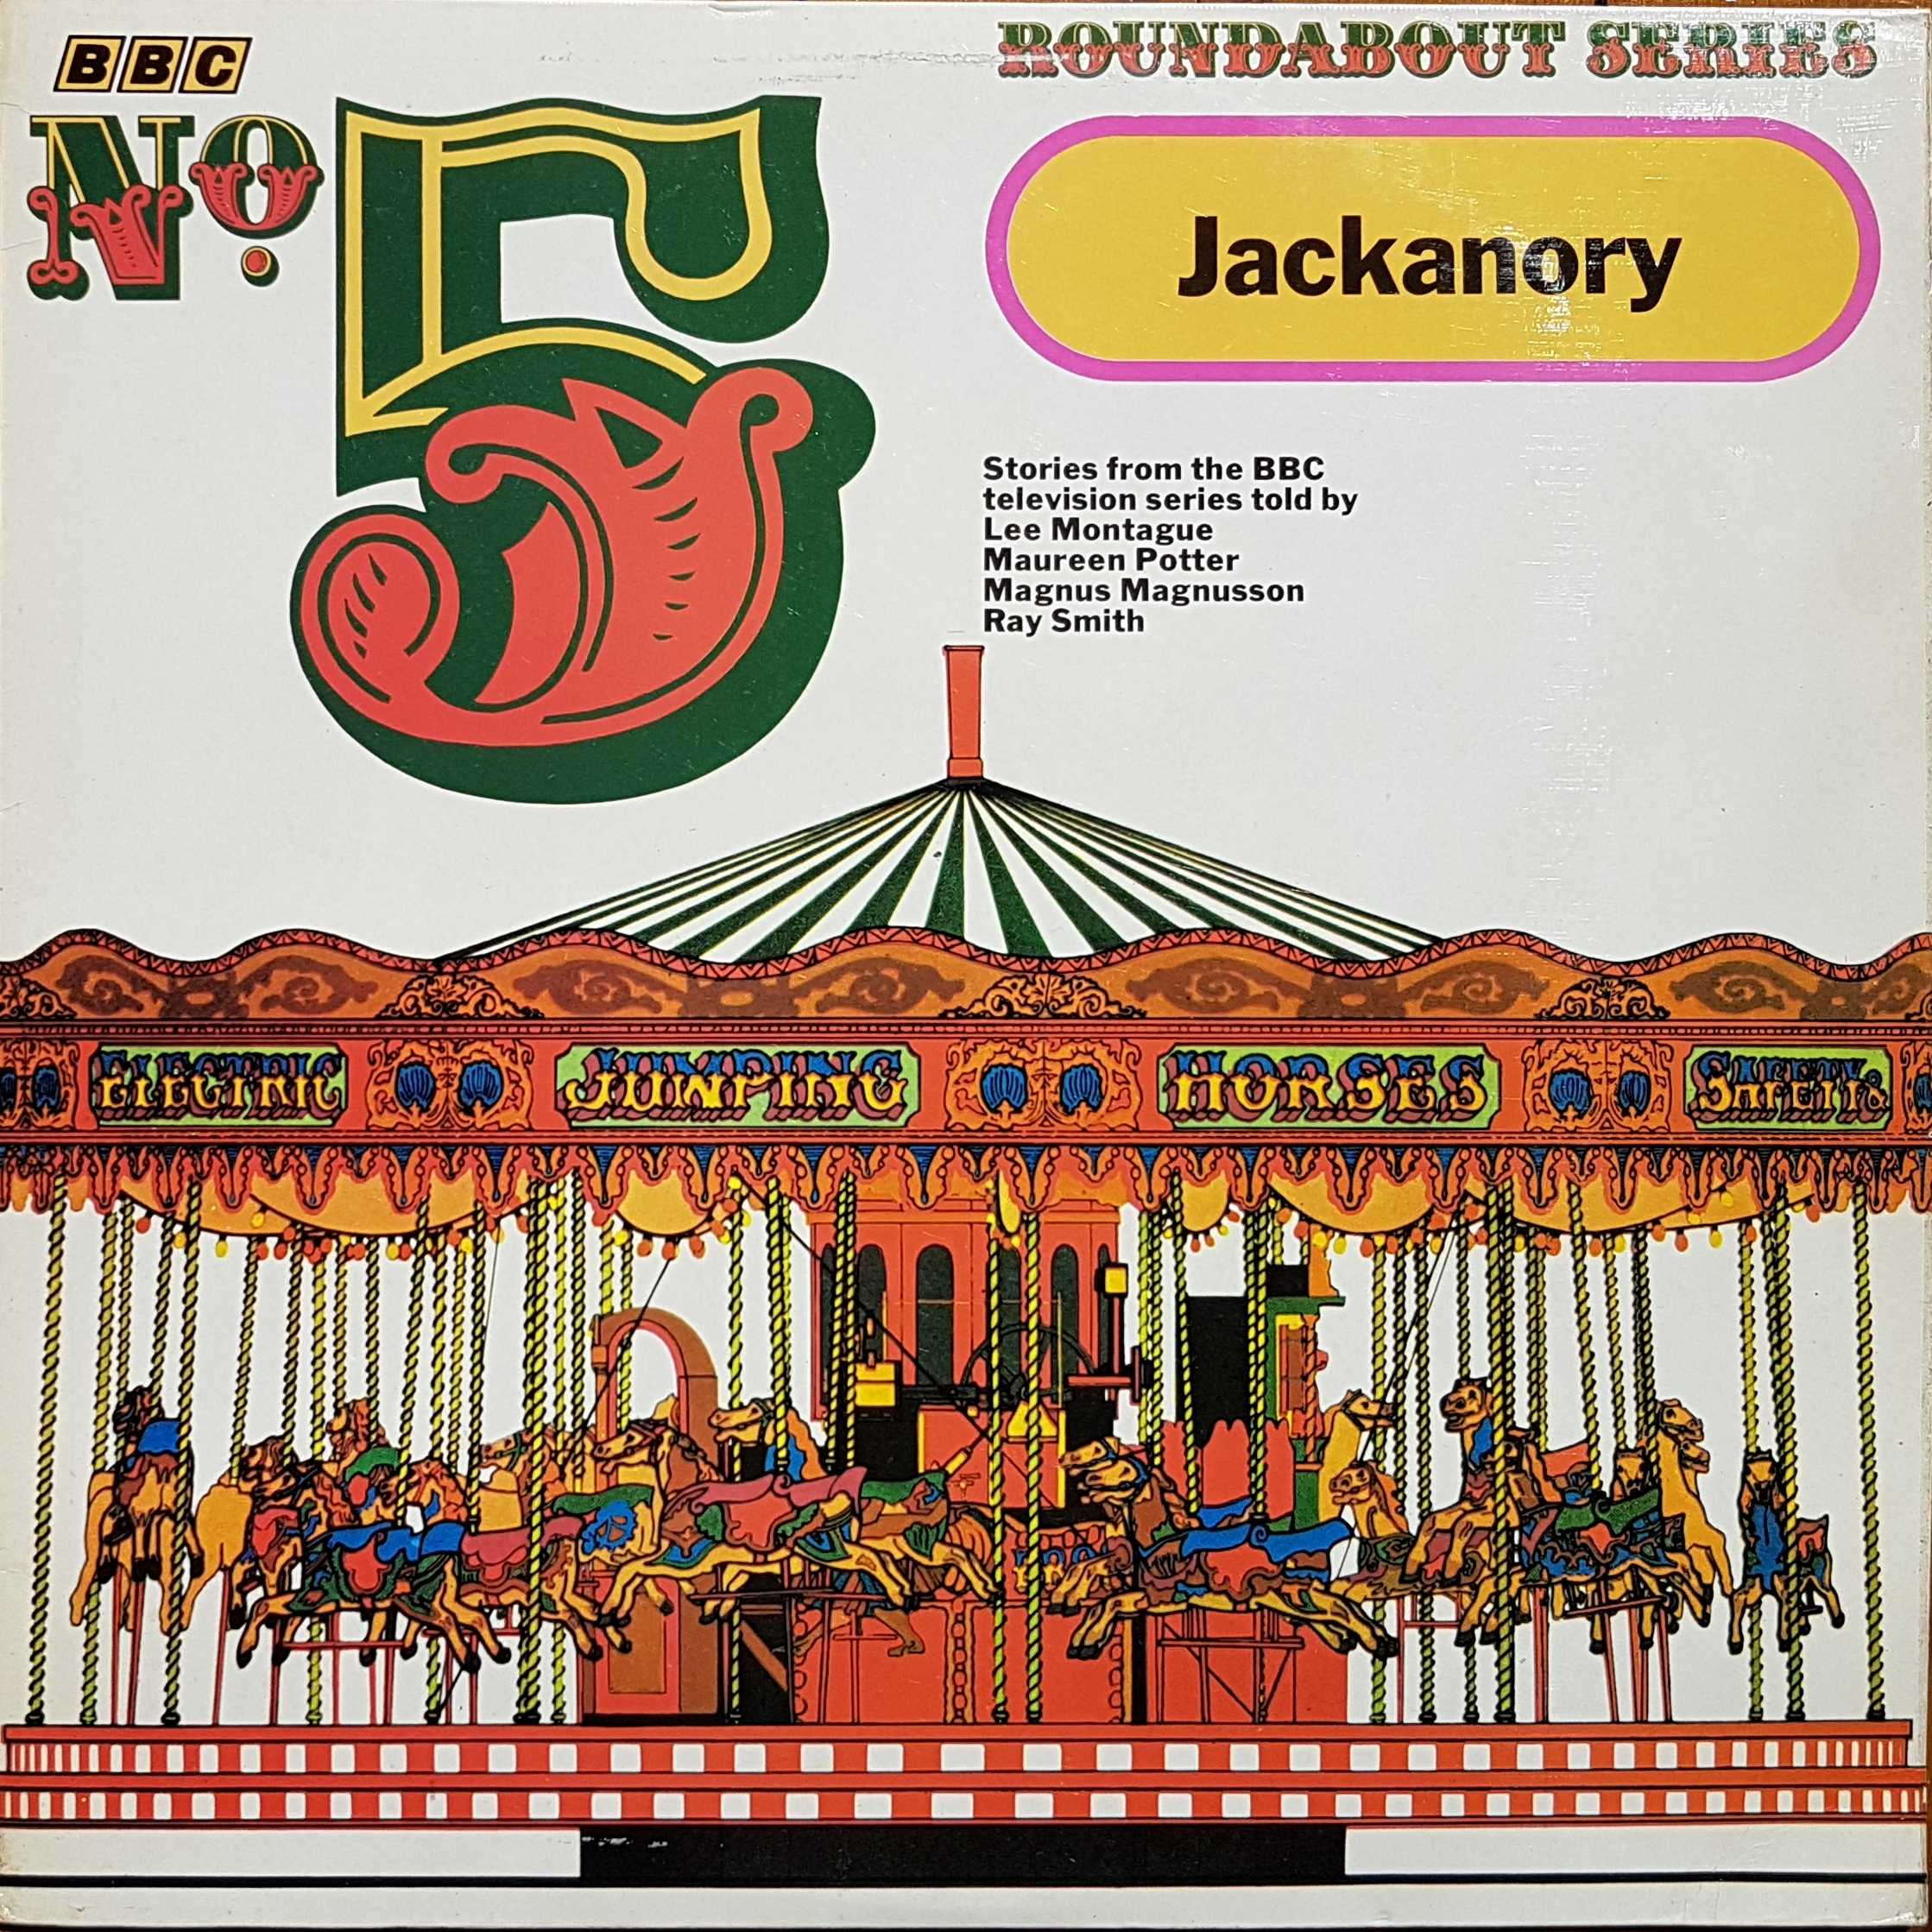 Picture of Jackanory by artist Lee Montague / Maureen Potter / Magnus Magnusson / Ray Smith from the BBC albums - Records and Tapes library